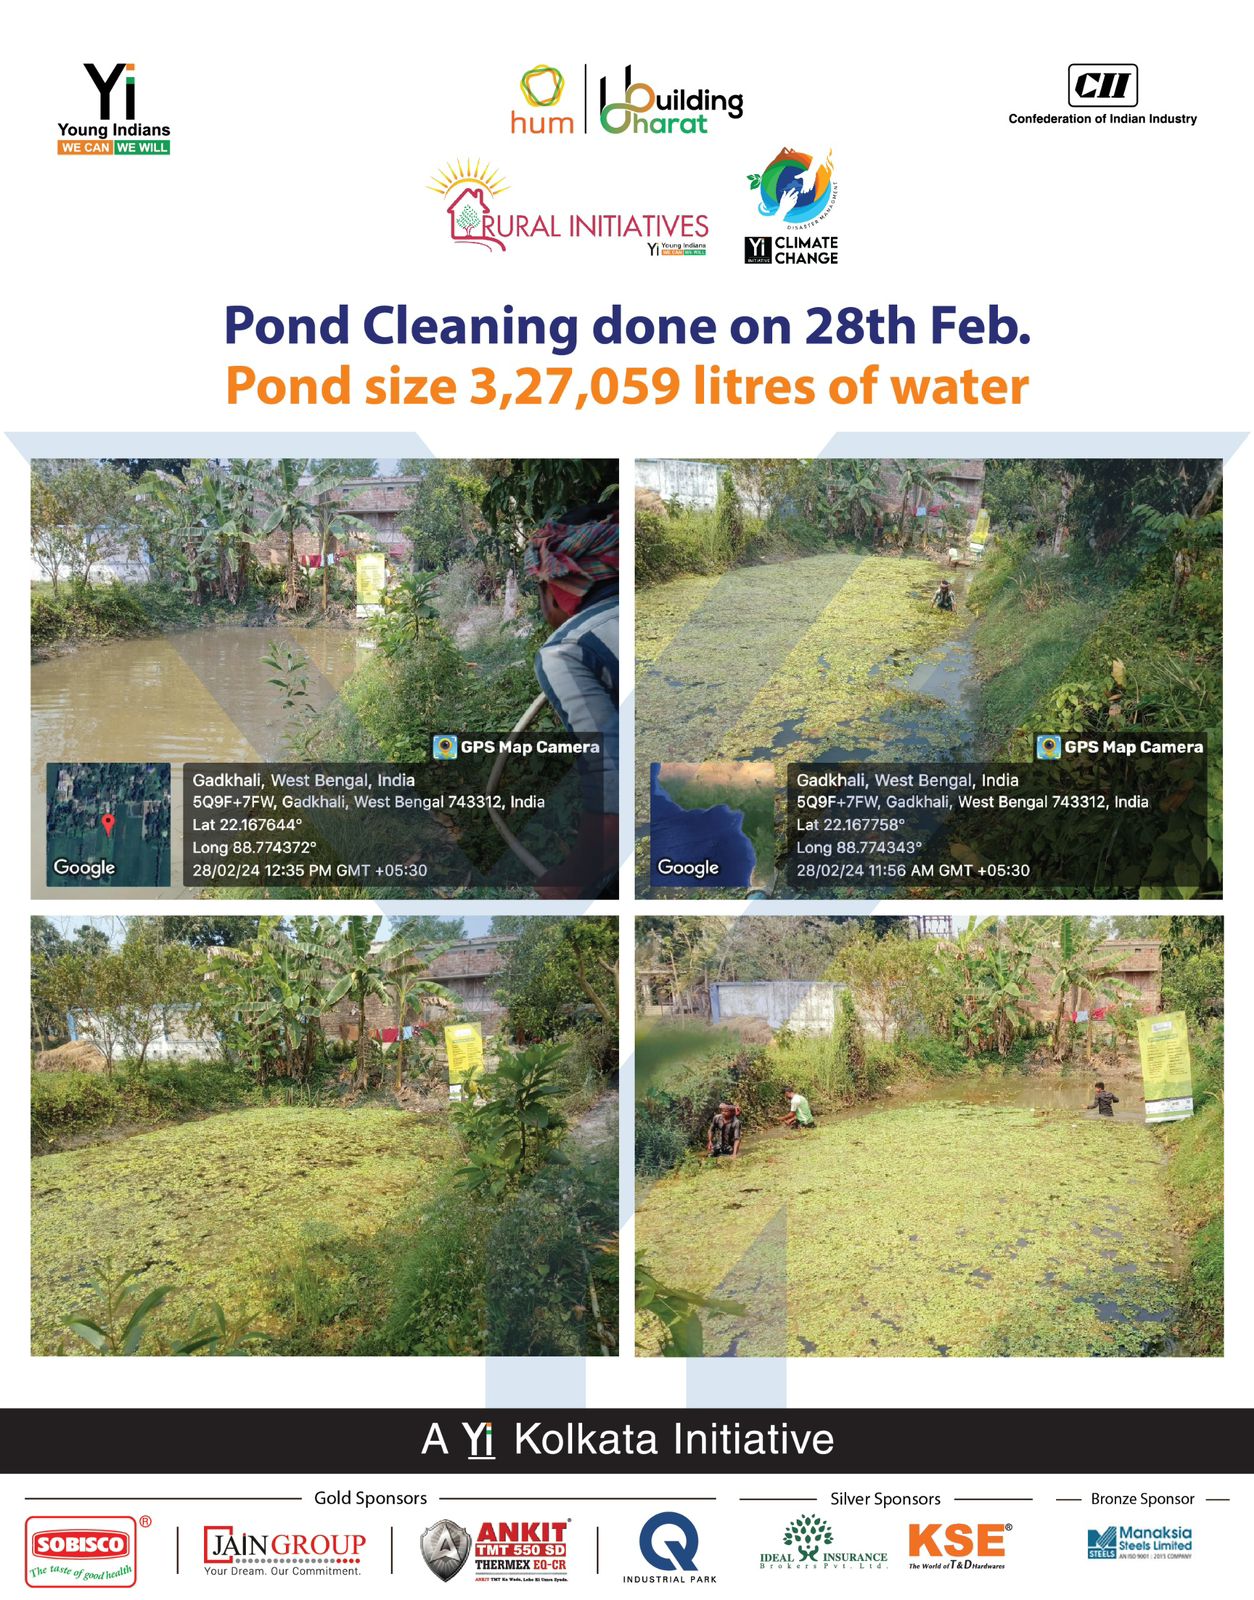 Yi24 | Rural Initiative - Pond Cleaning